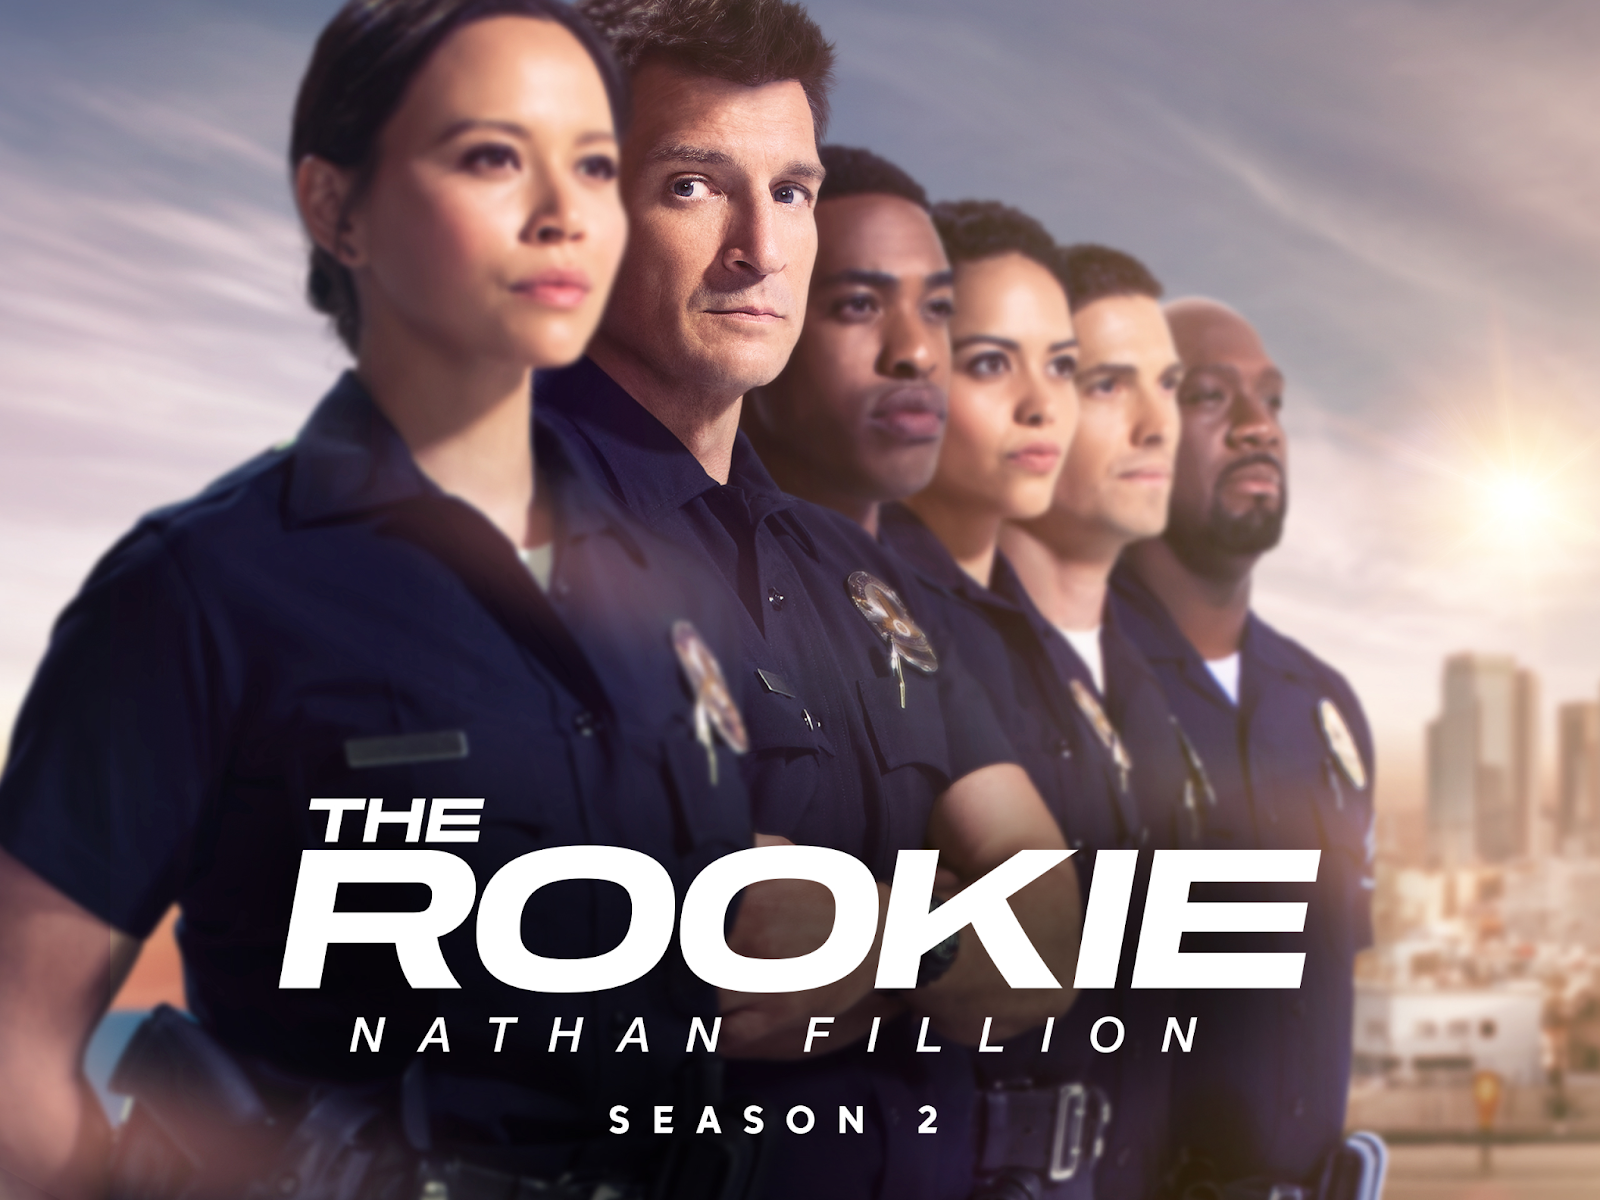 When Will The Rookie Season 6 Premiere on ABC?